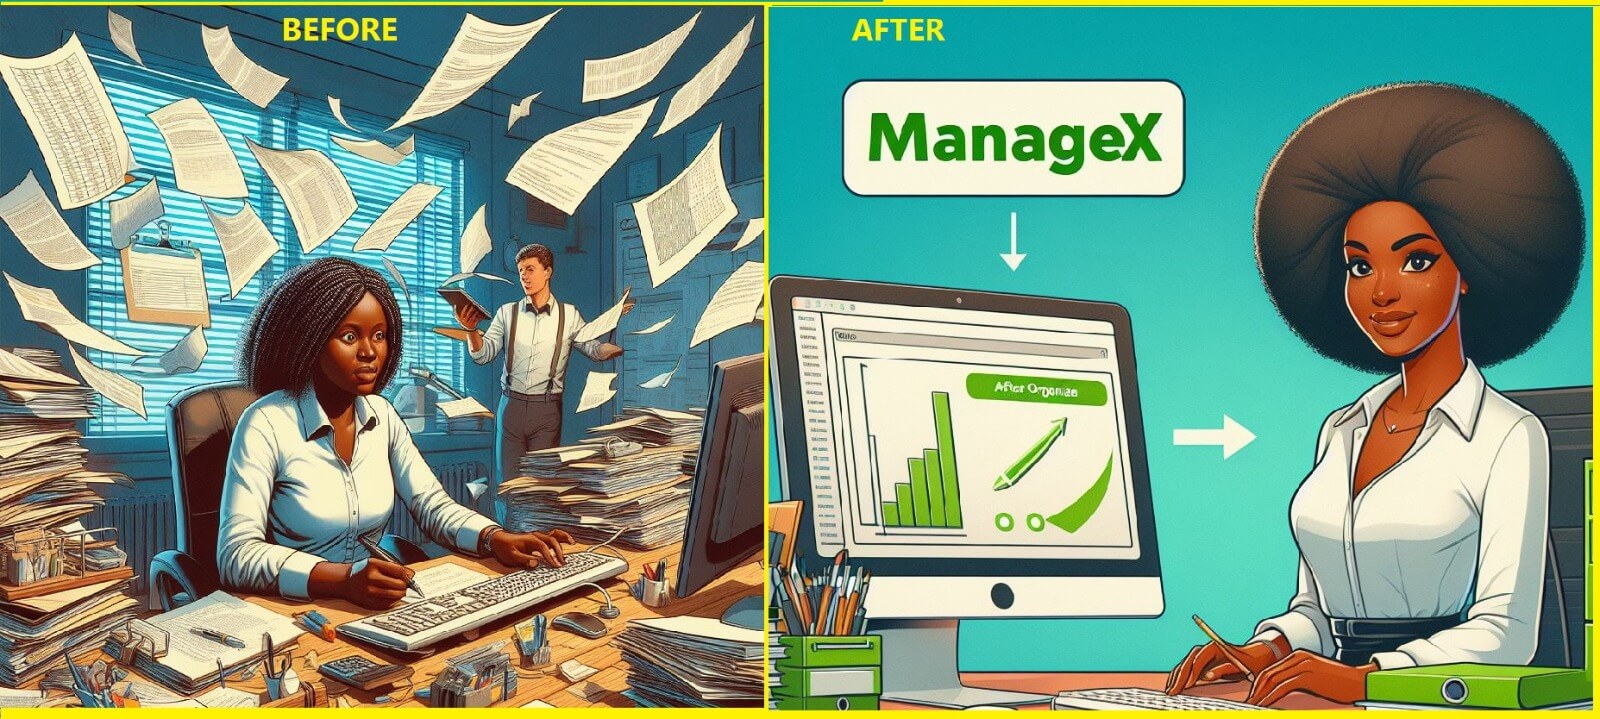 before and after cartoon illustration image of using manageex vs without